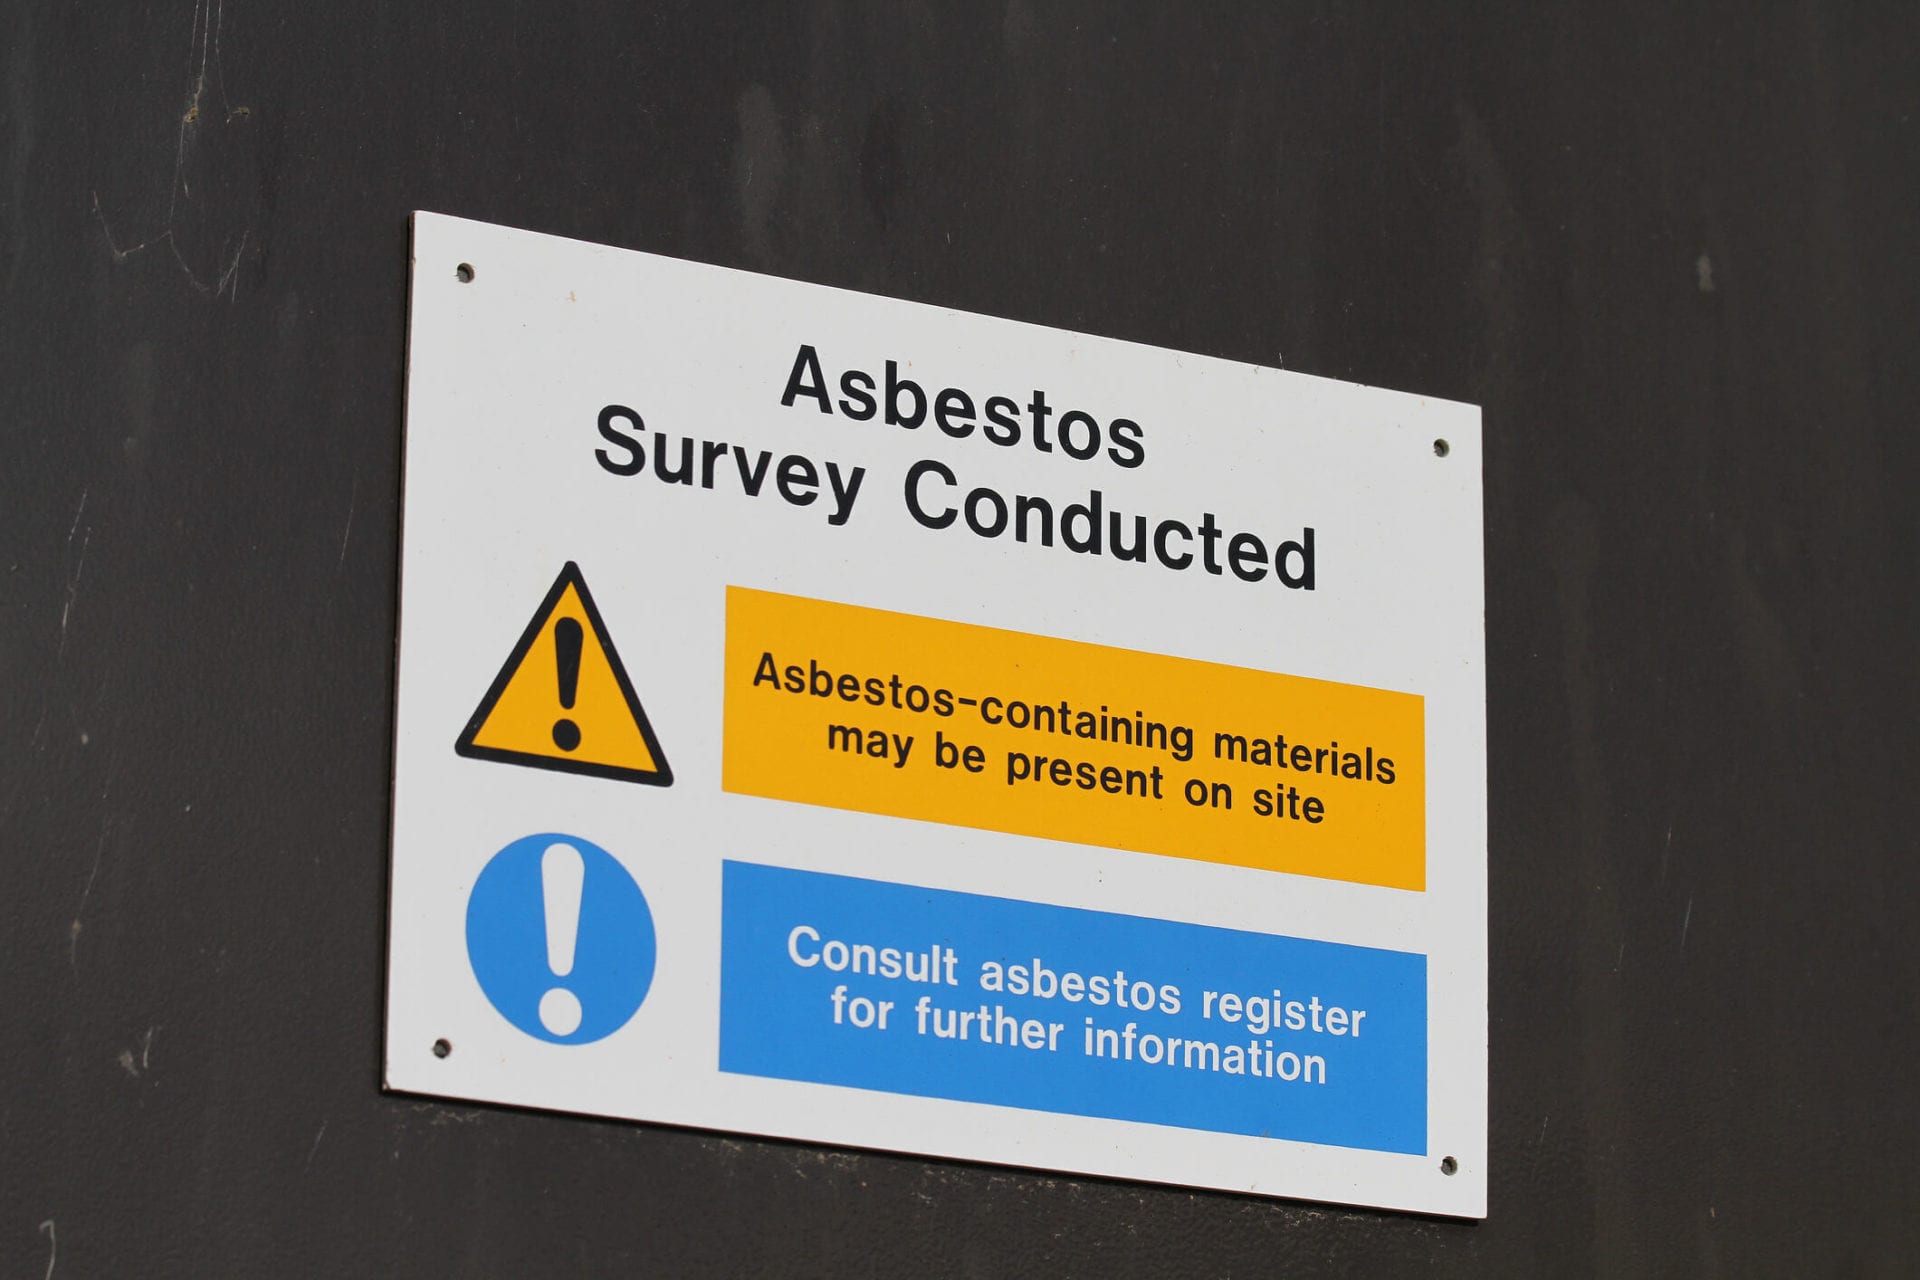 Sign warning of possible asbestos contamination and danger to health.